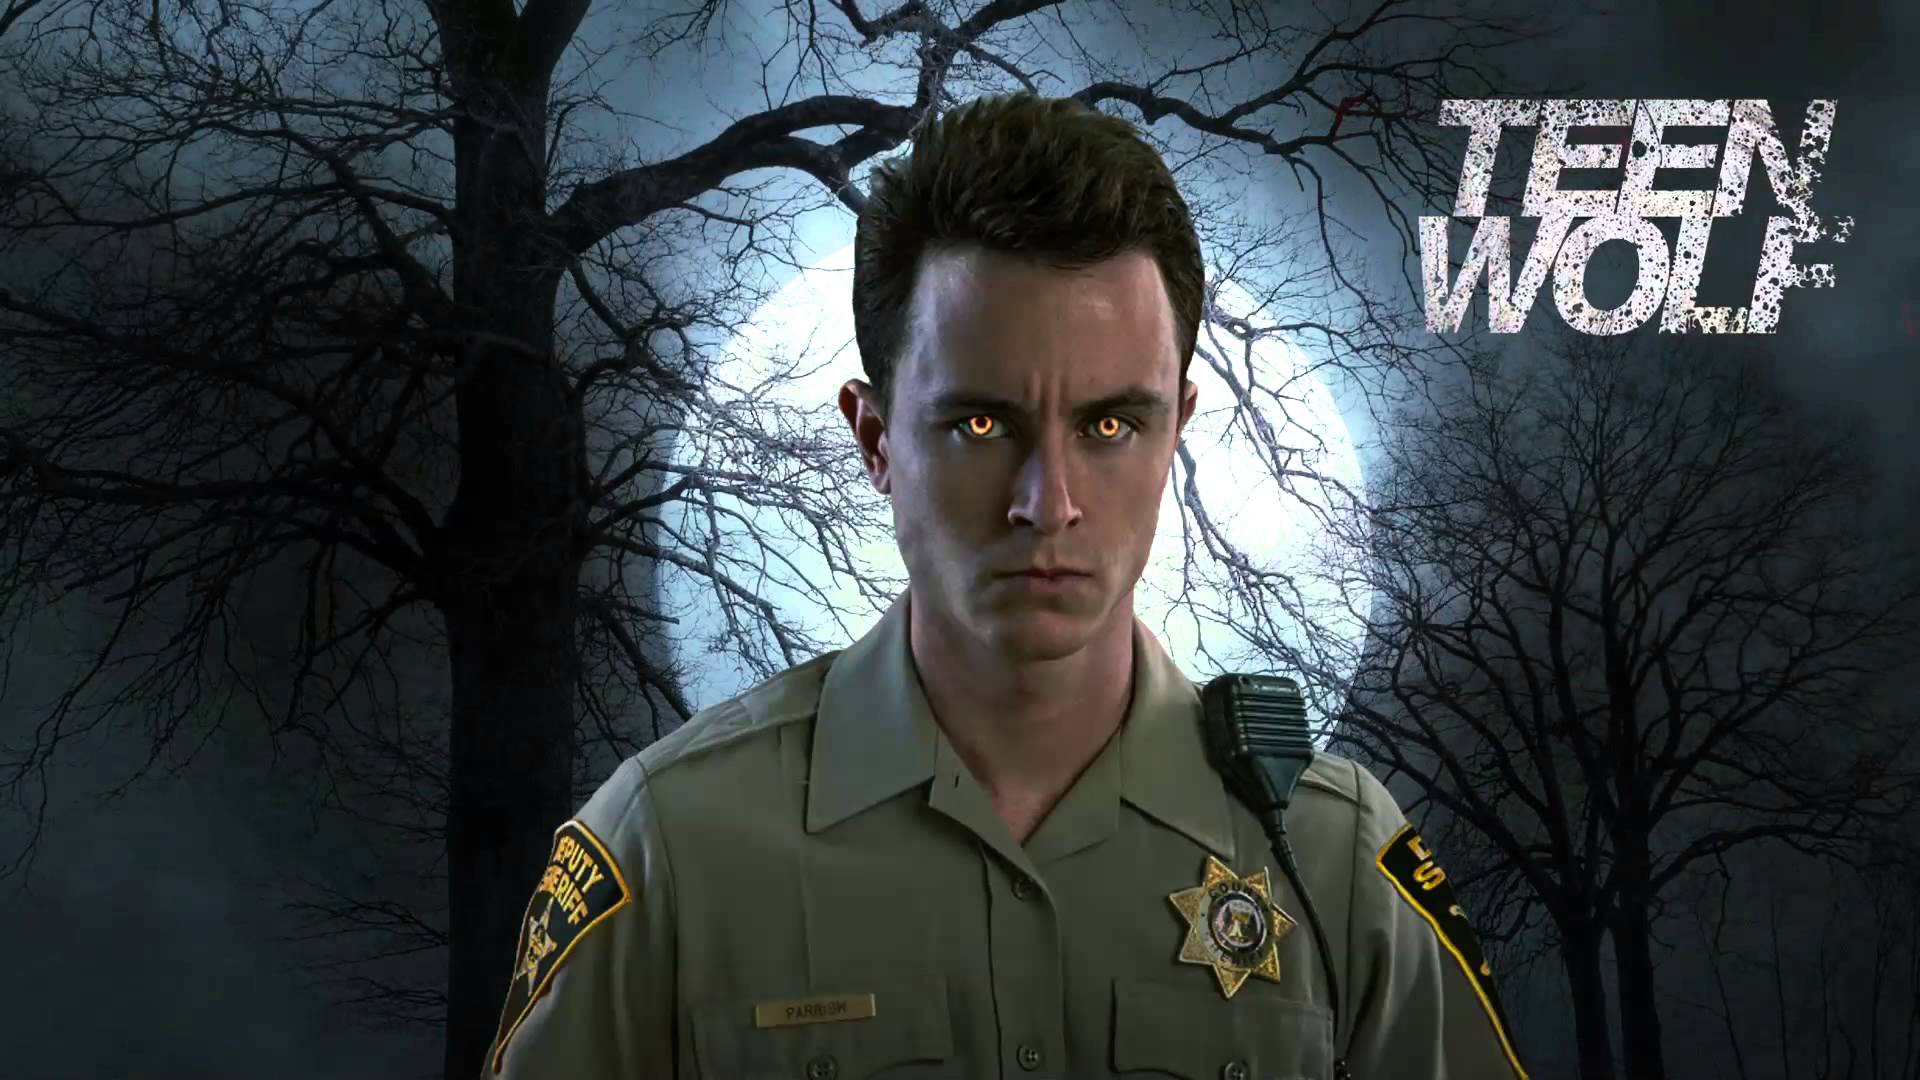 Wallpaper of Parrish for fans of Teen Wolf. 